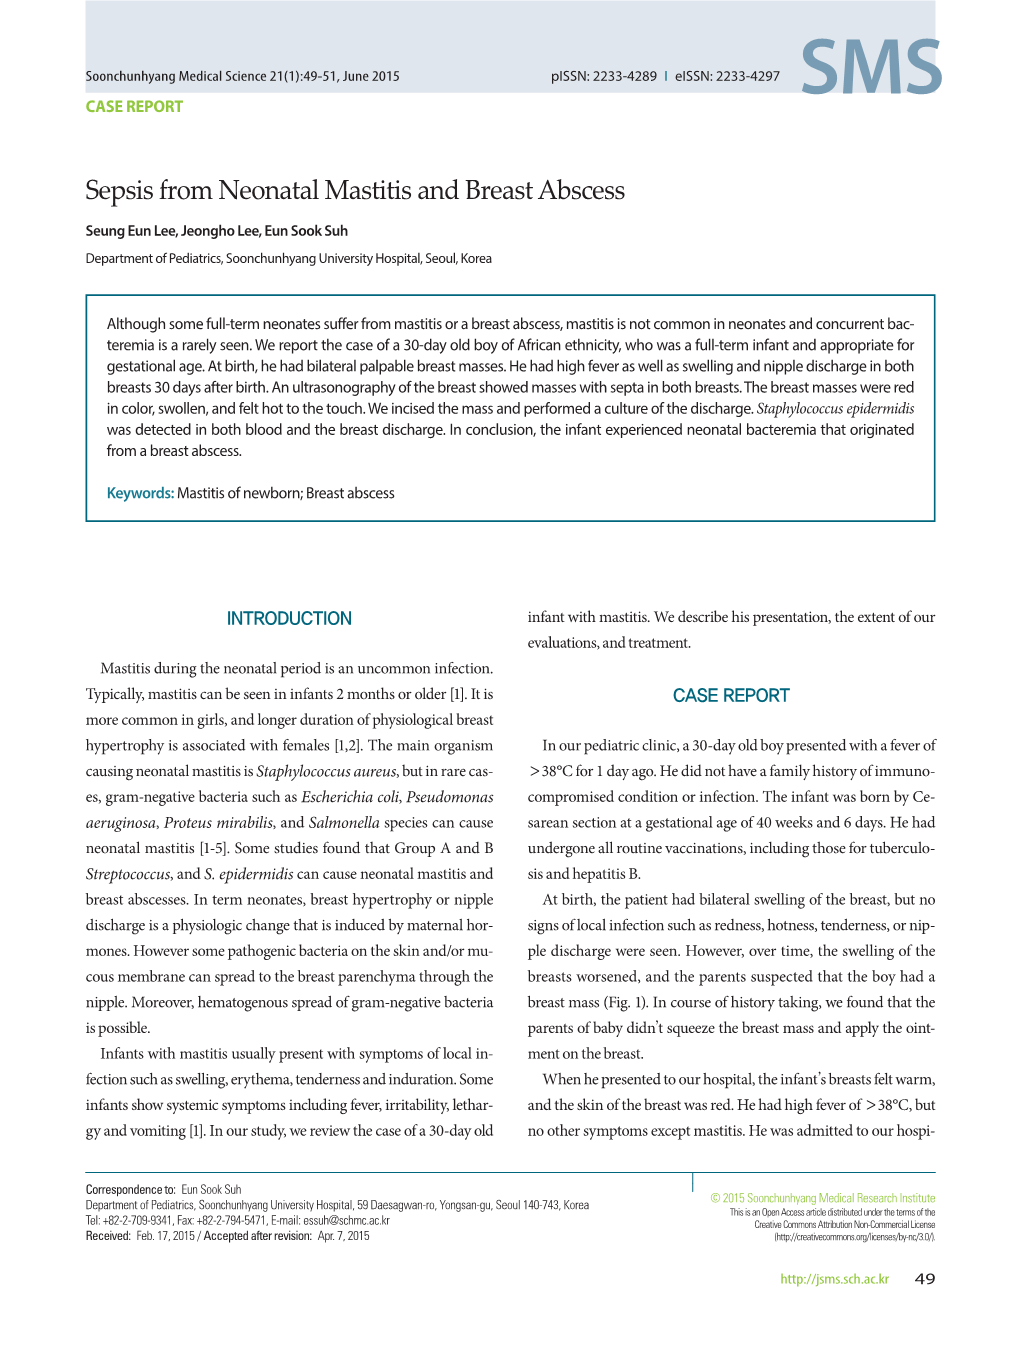 Sepsis from Neonatal Mastitis and Breast Abscess